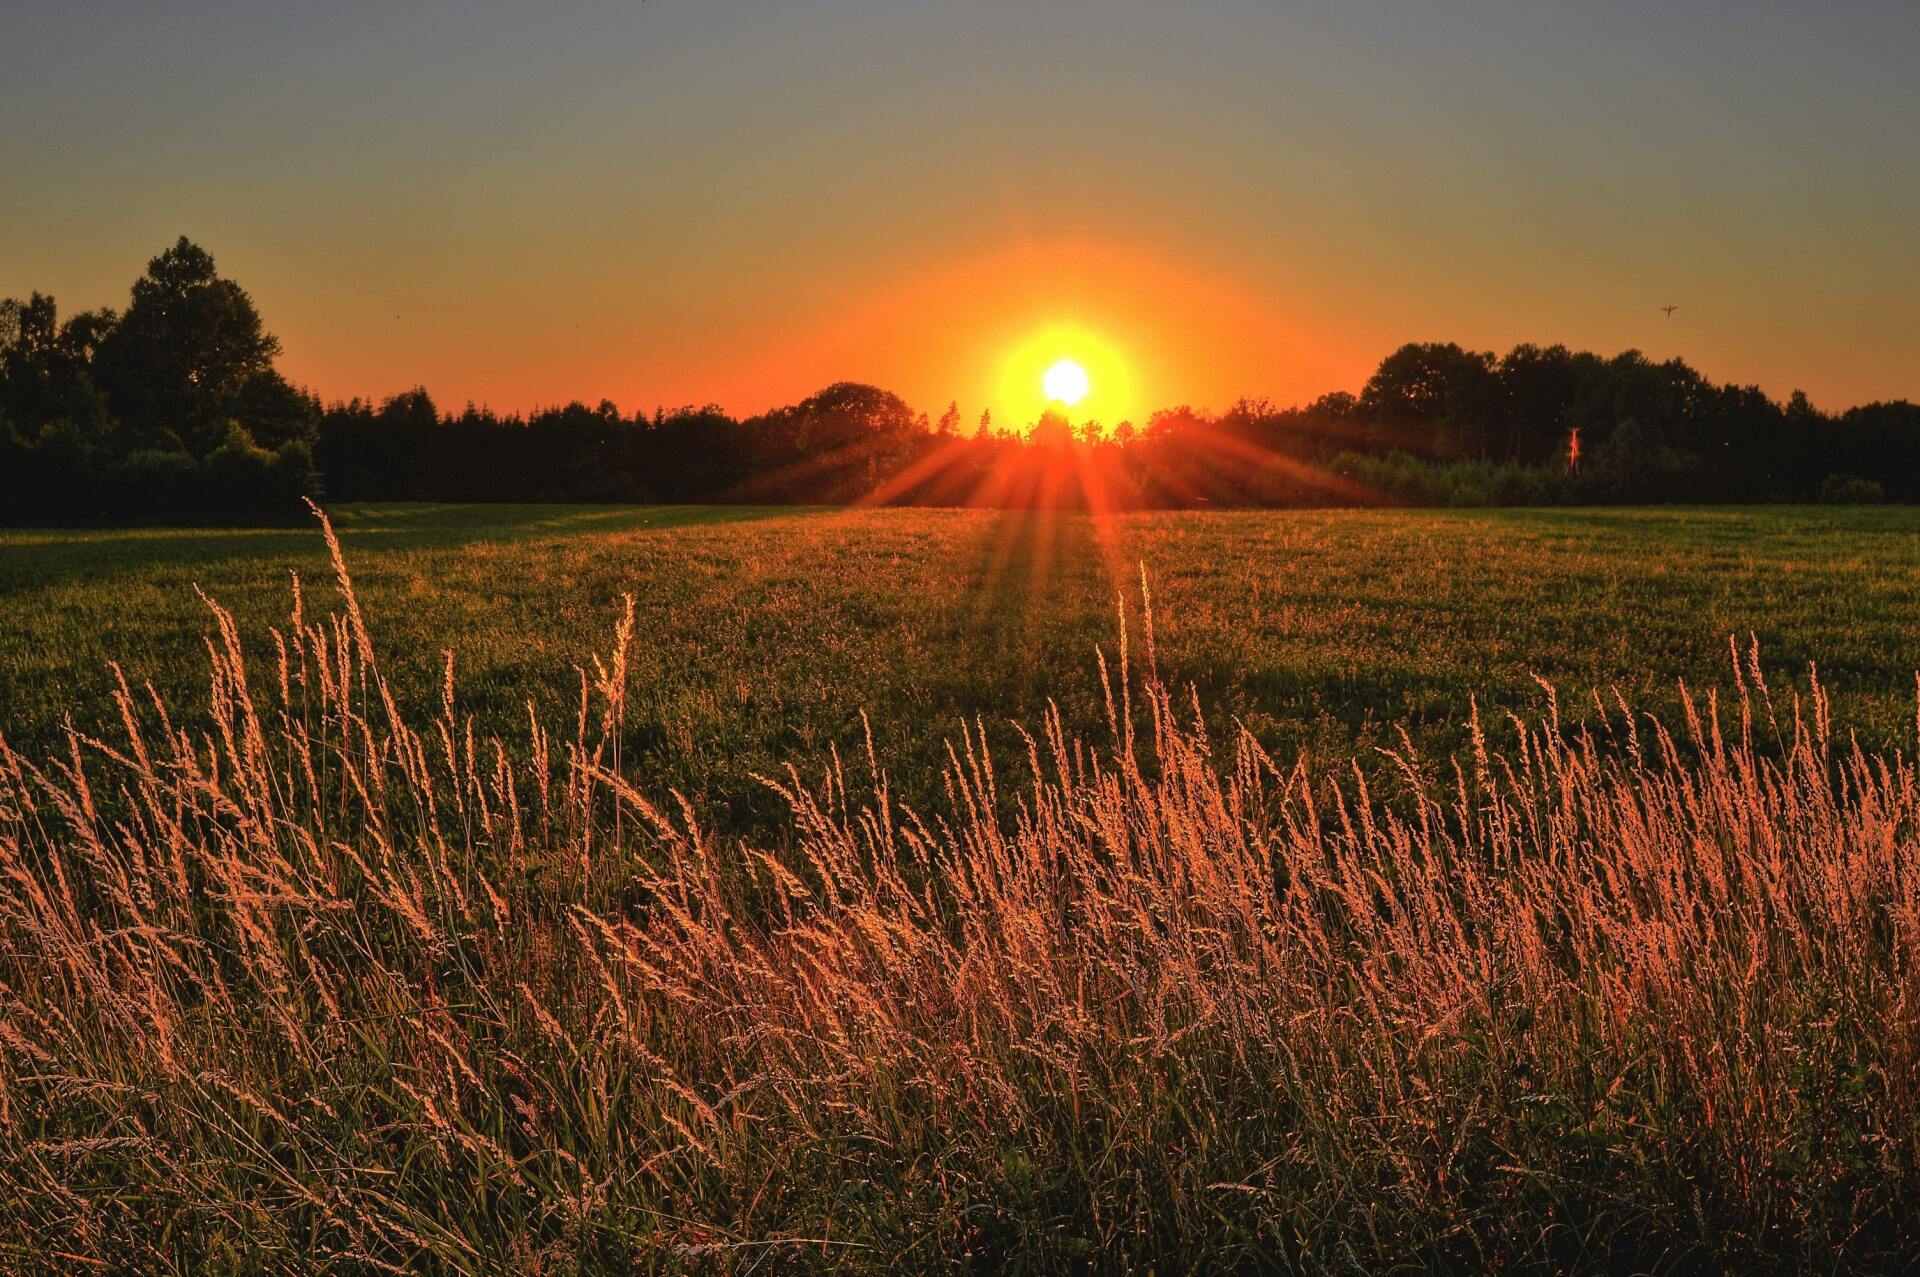 The sun is setting over a field of tall grass the coaching guild,  life coach training